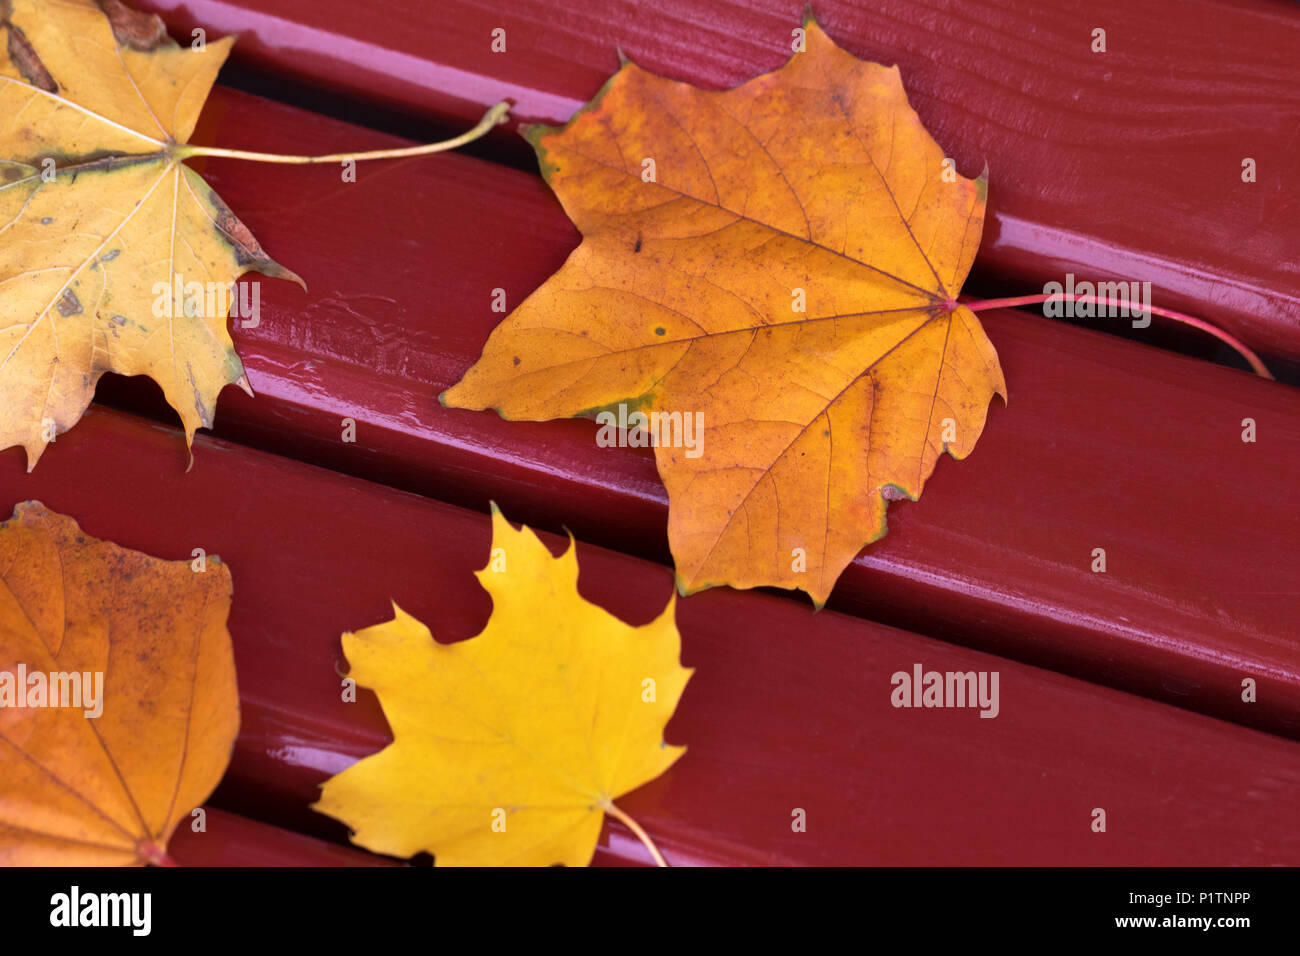 Autumn dry maple leaves on dark red wooden bench. View from above. Selective focus. Stock Photo